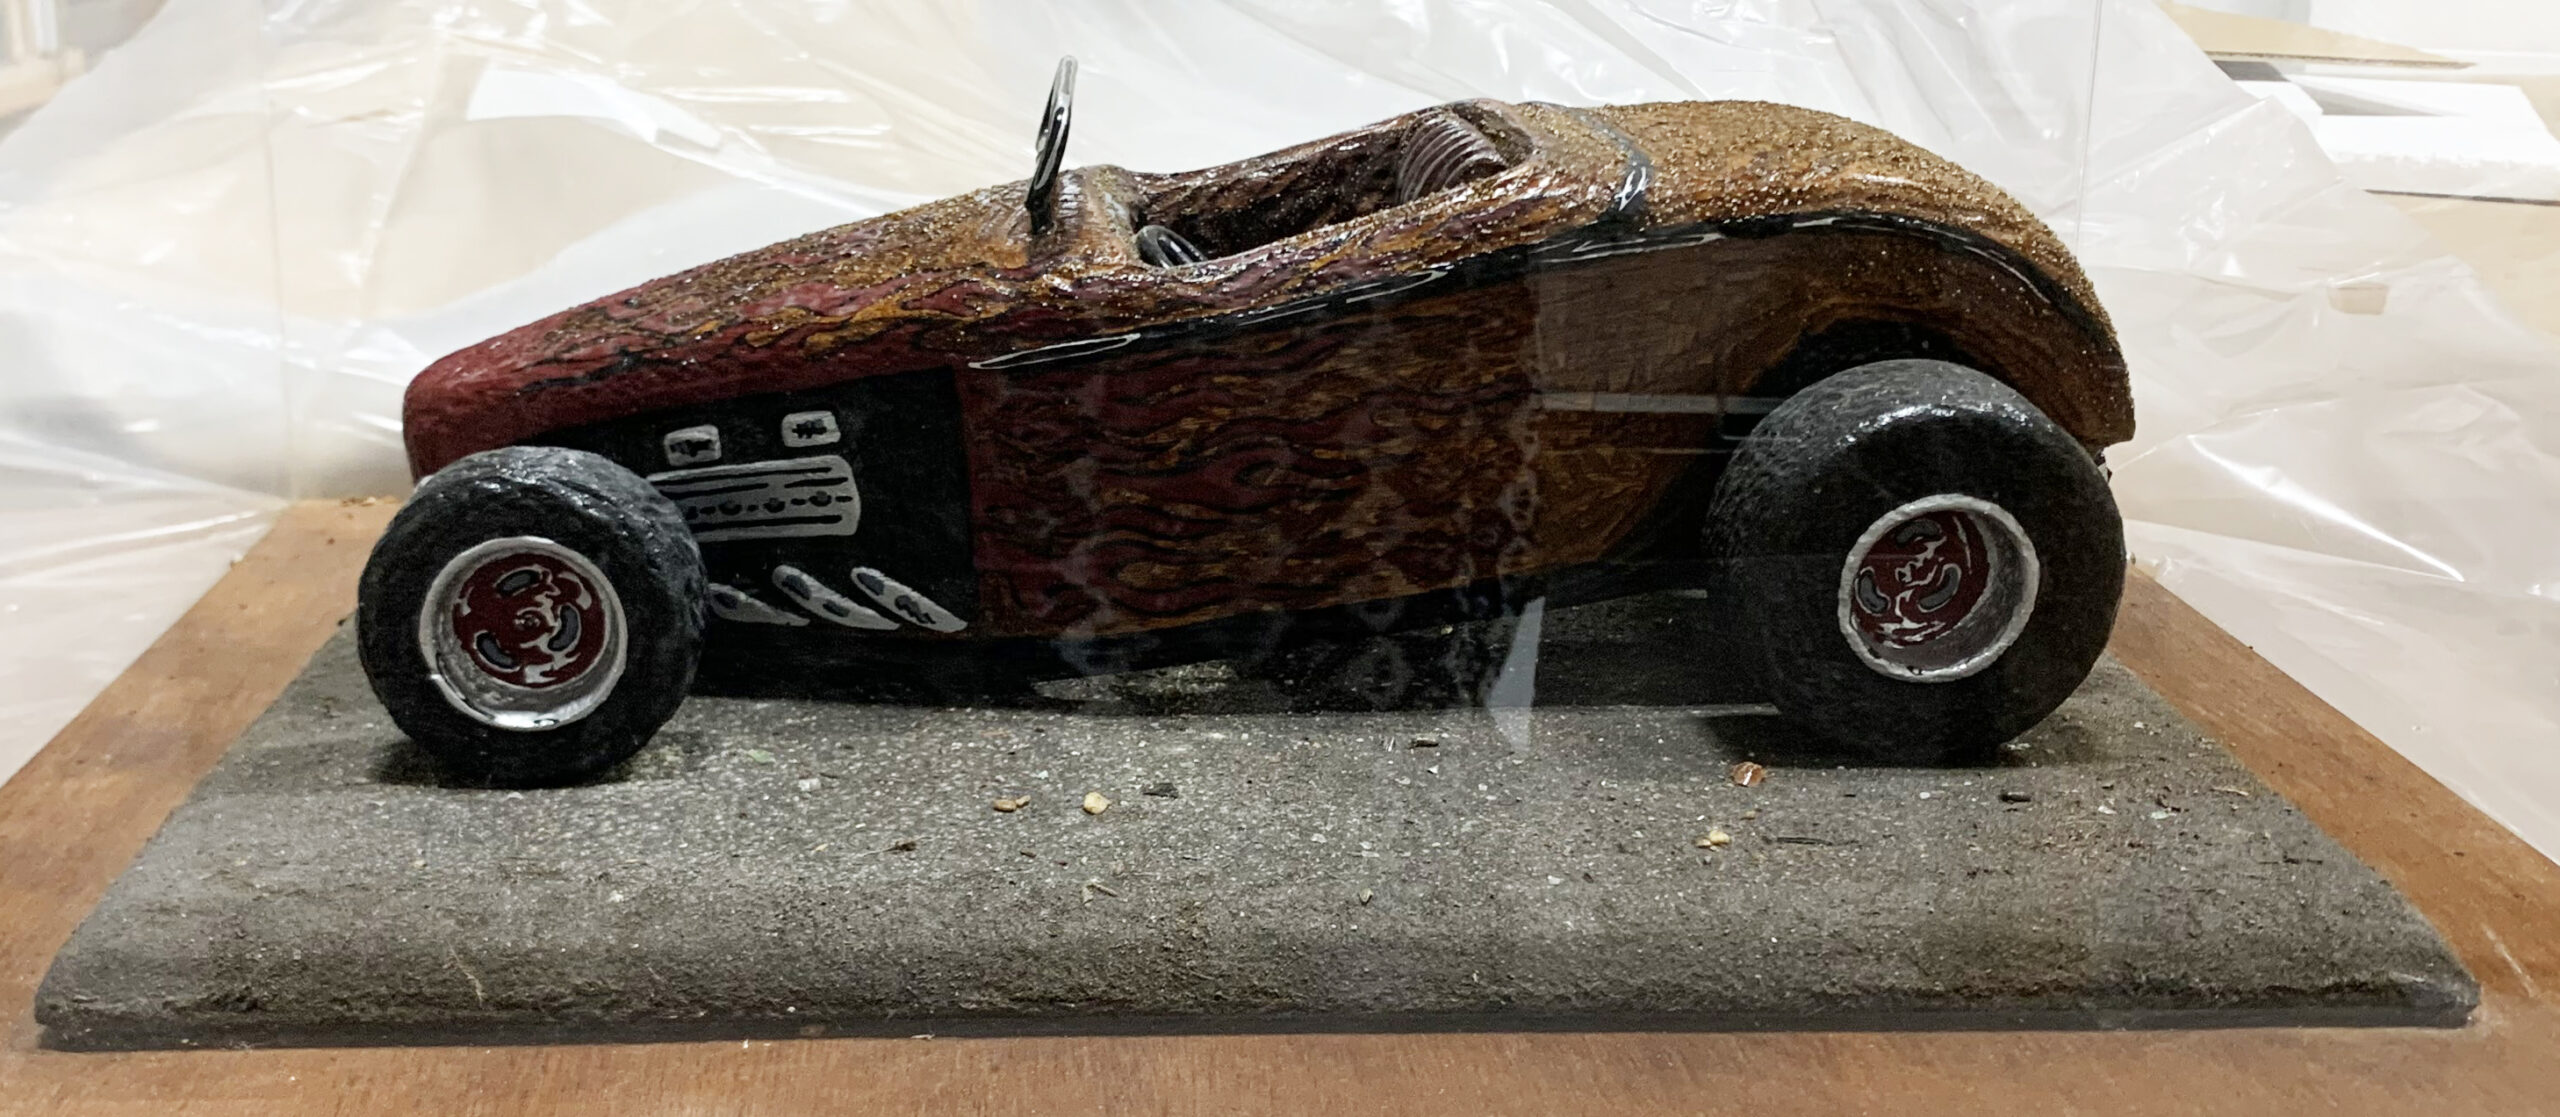 Image of car maquette sculpture by artist Tom Jenkins